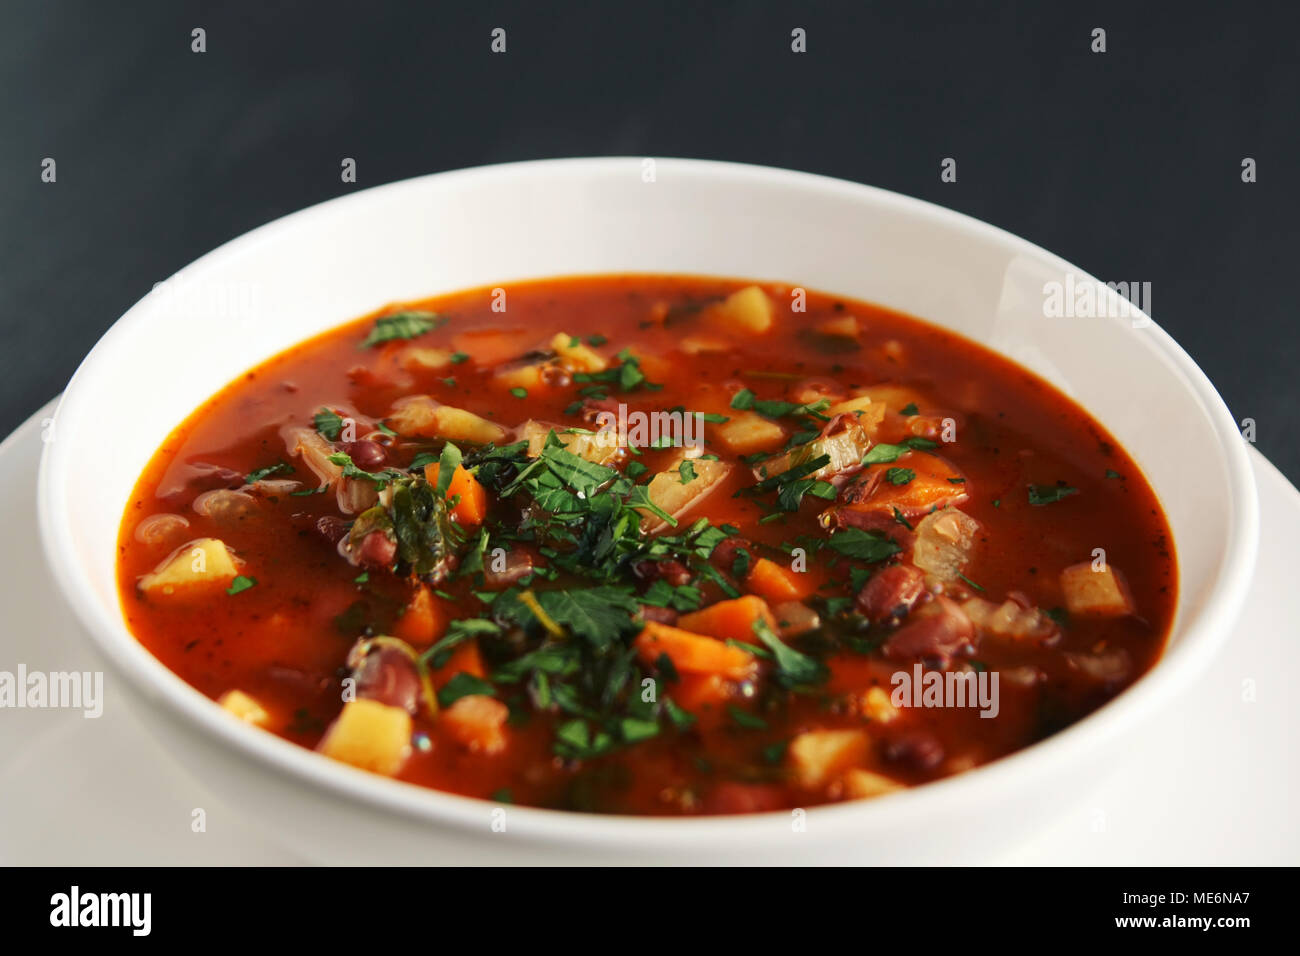 Tomato soup with red beans, potato and carrot. Vegan diet. European cuisine. Vegetarian dish. Main course. Organic meal. Stock Photo